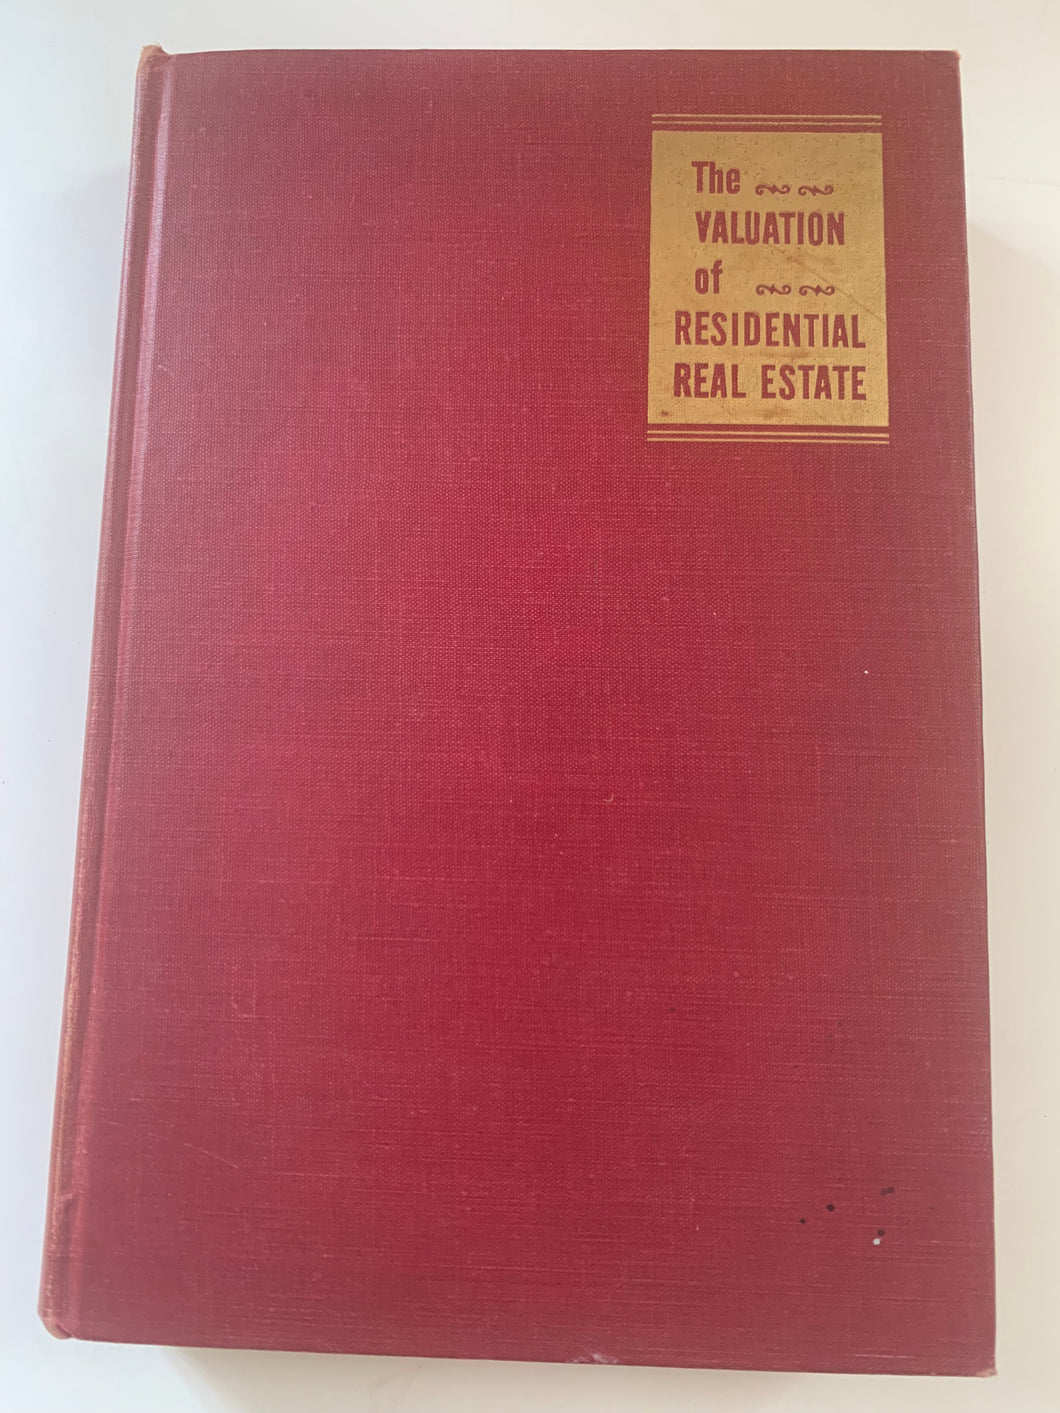 The Valuation of Residential Real Estate by Arthur A May